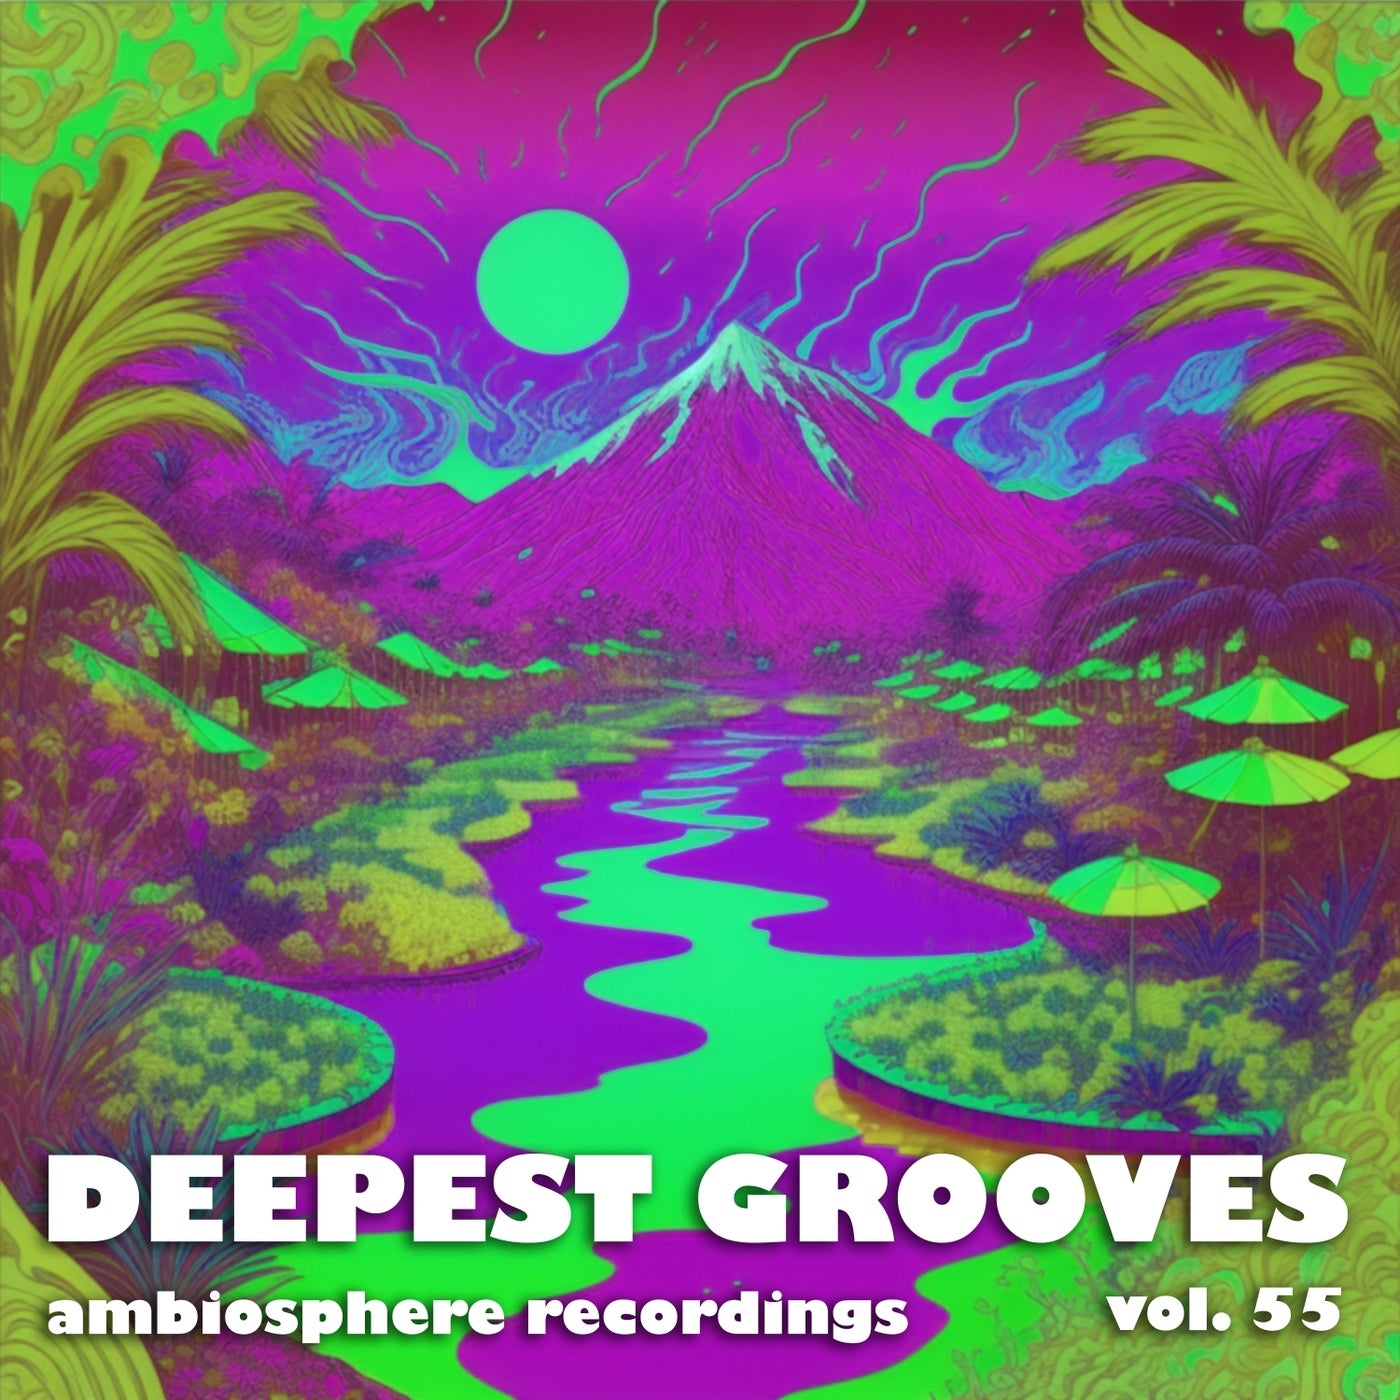 Deepest Grooves Vol. 55